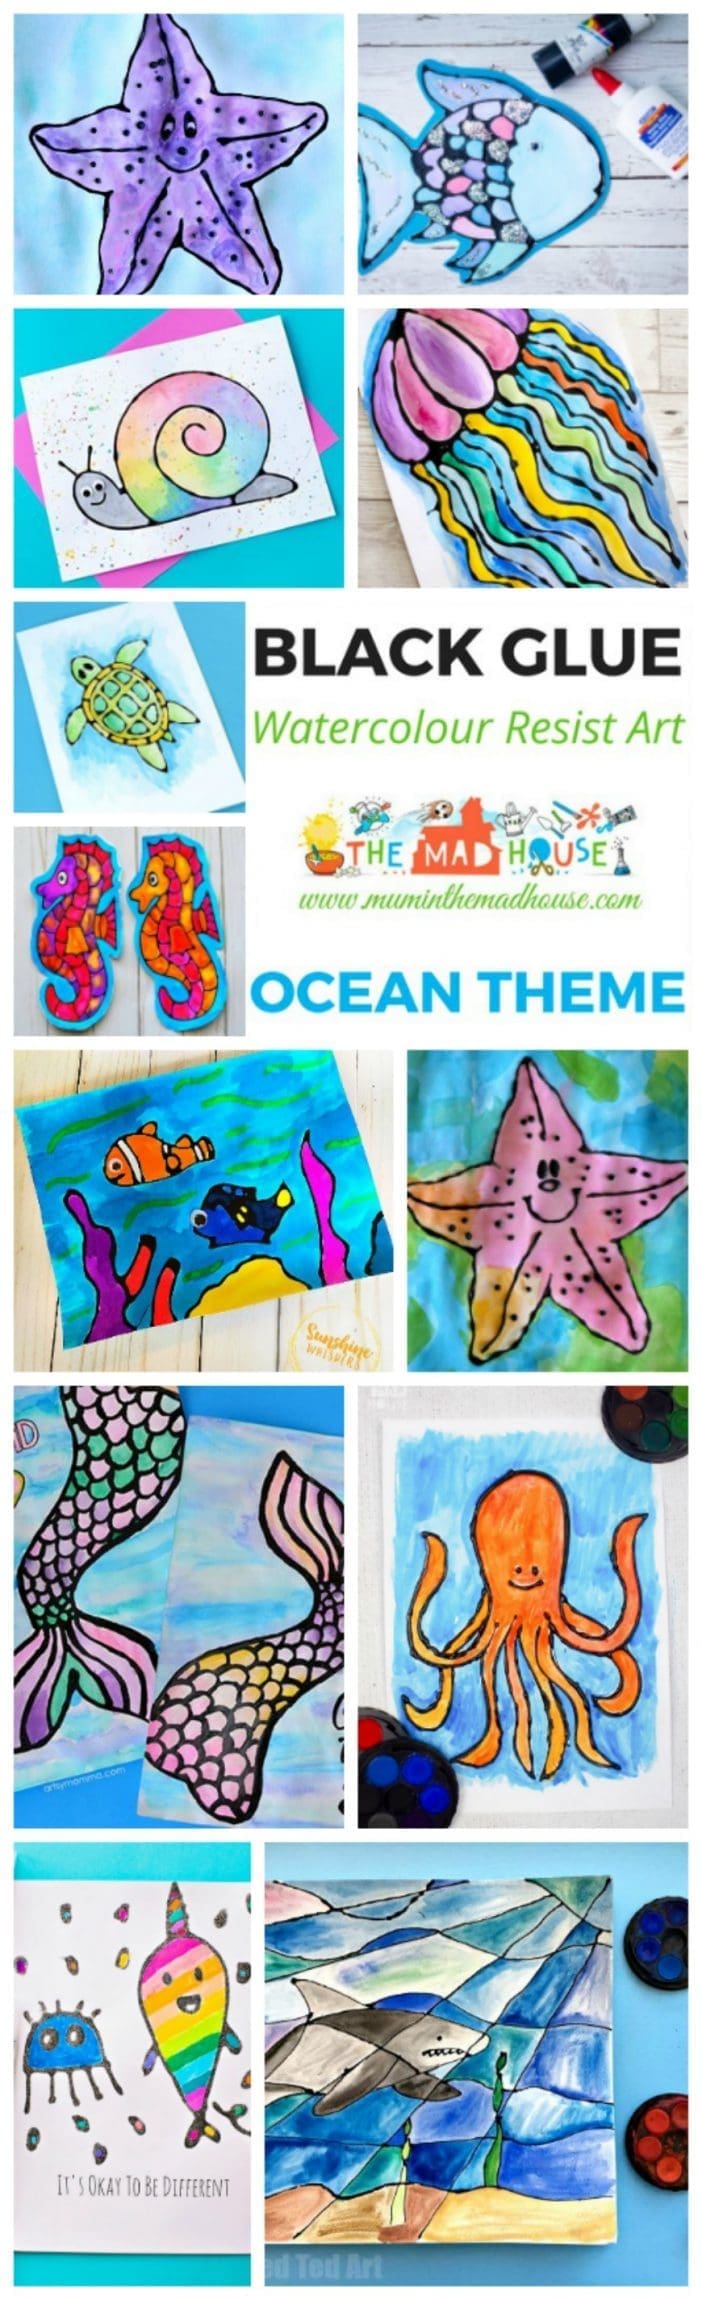 The complete under the sea watercolour glue resist Roundup. Yes, Ocean Watercolour Glue Resist Art Ideas many with free printables to make it e